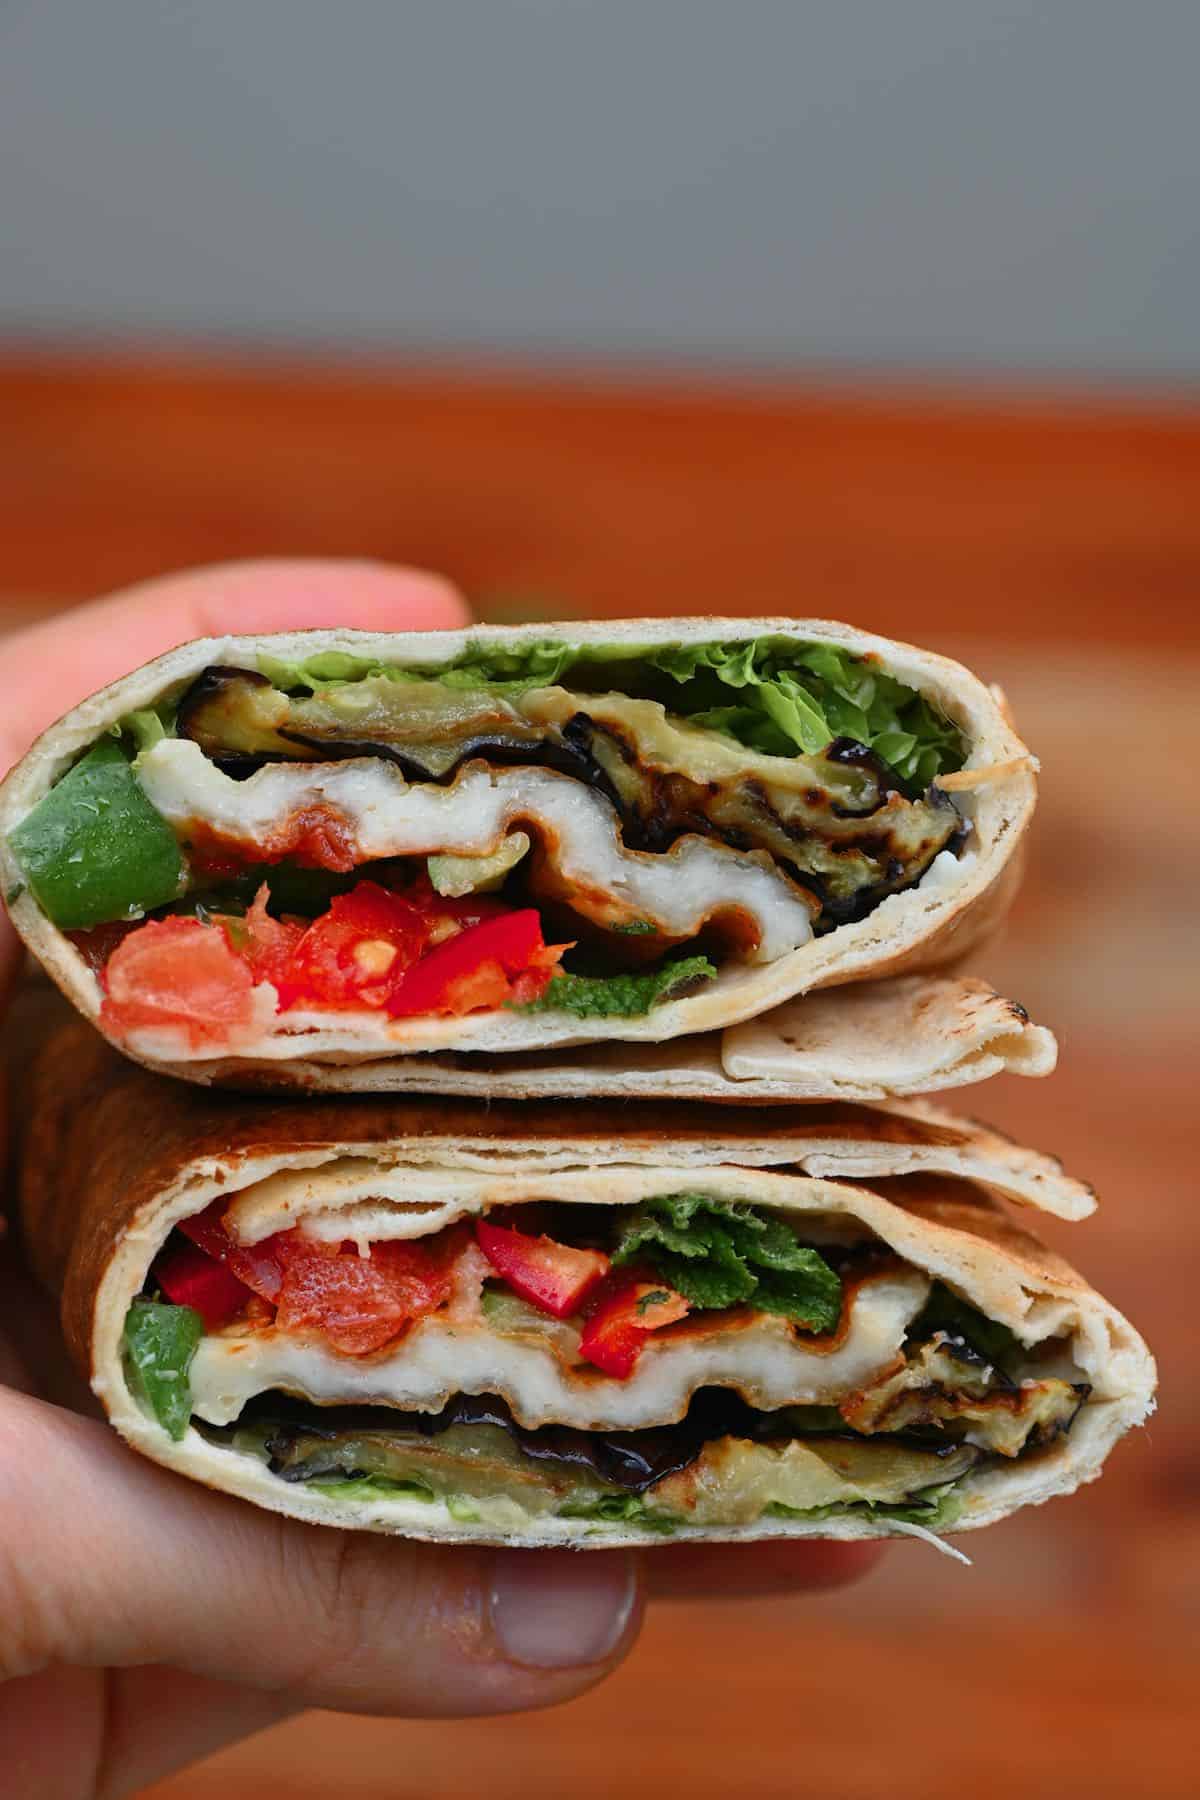 Two halves of an eggplant wrap